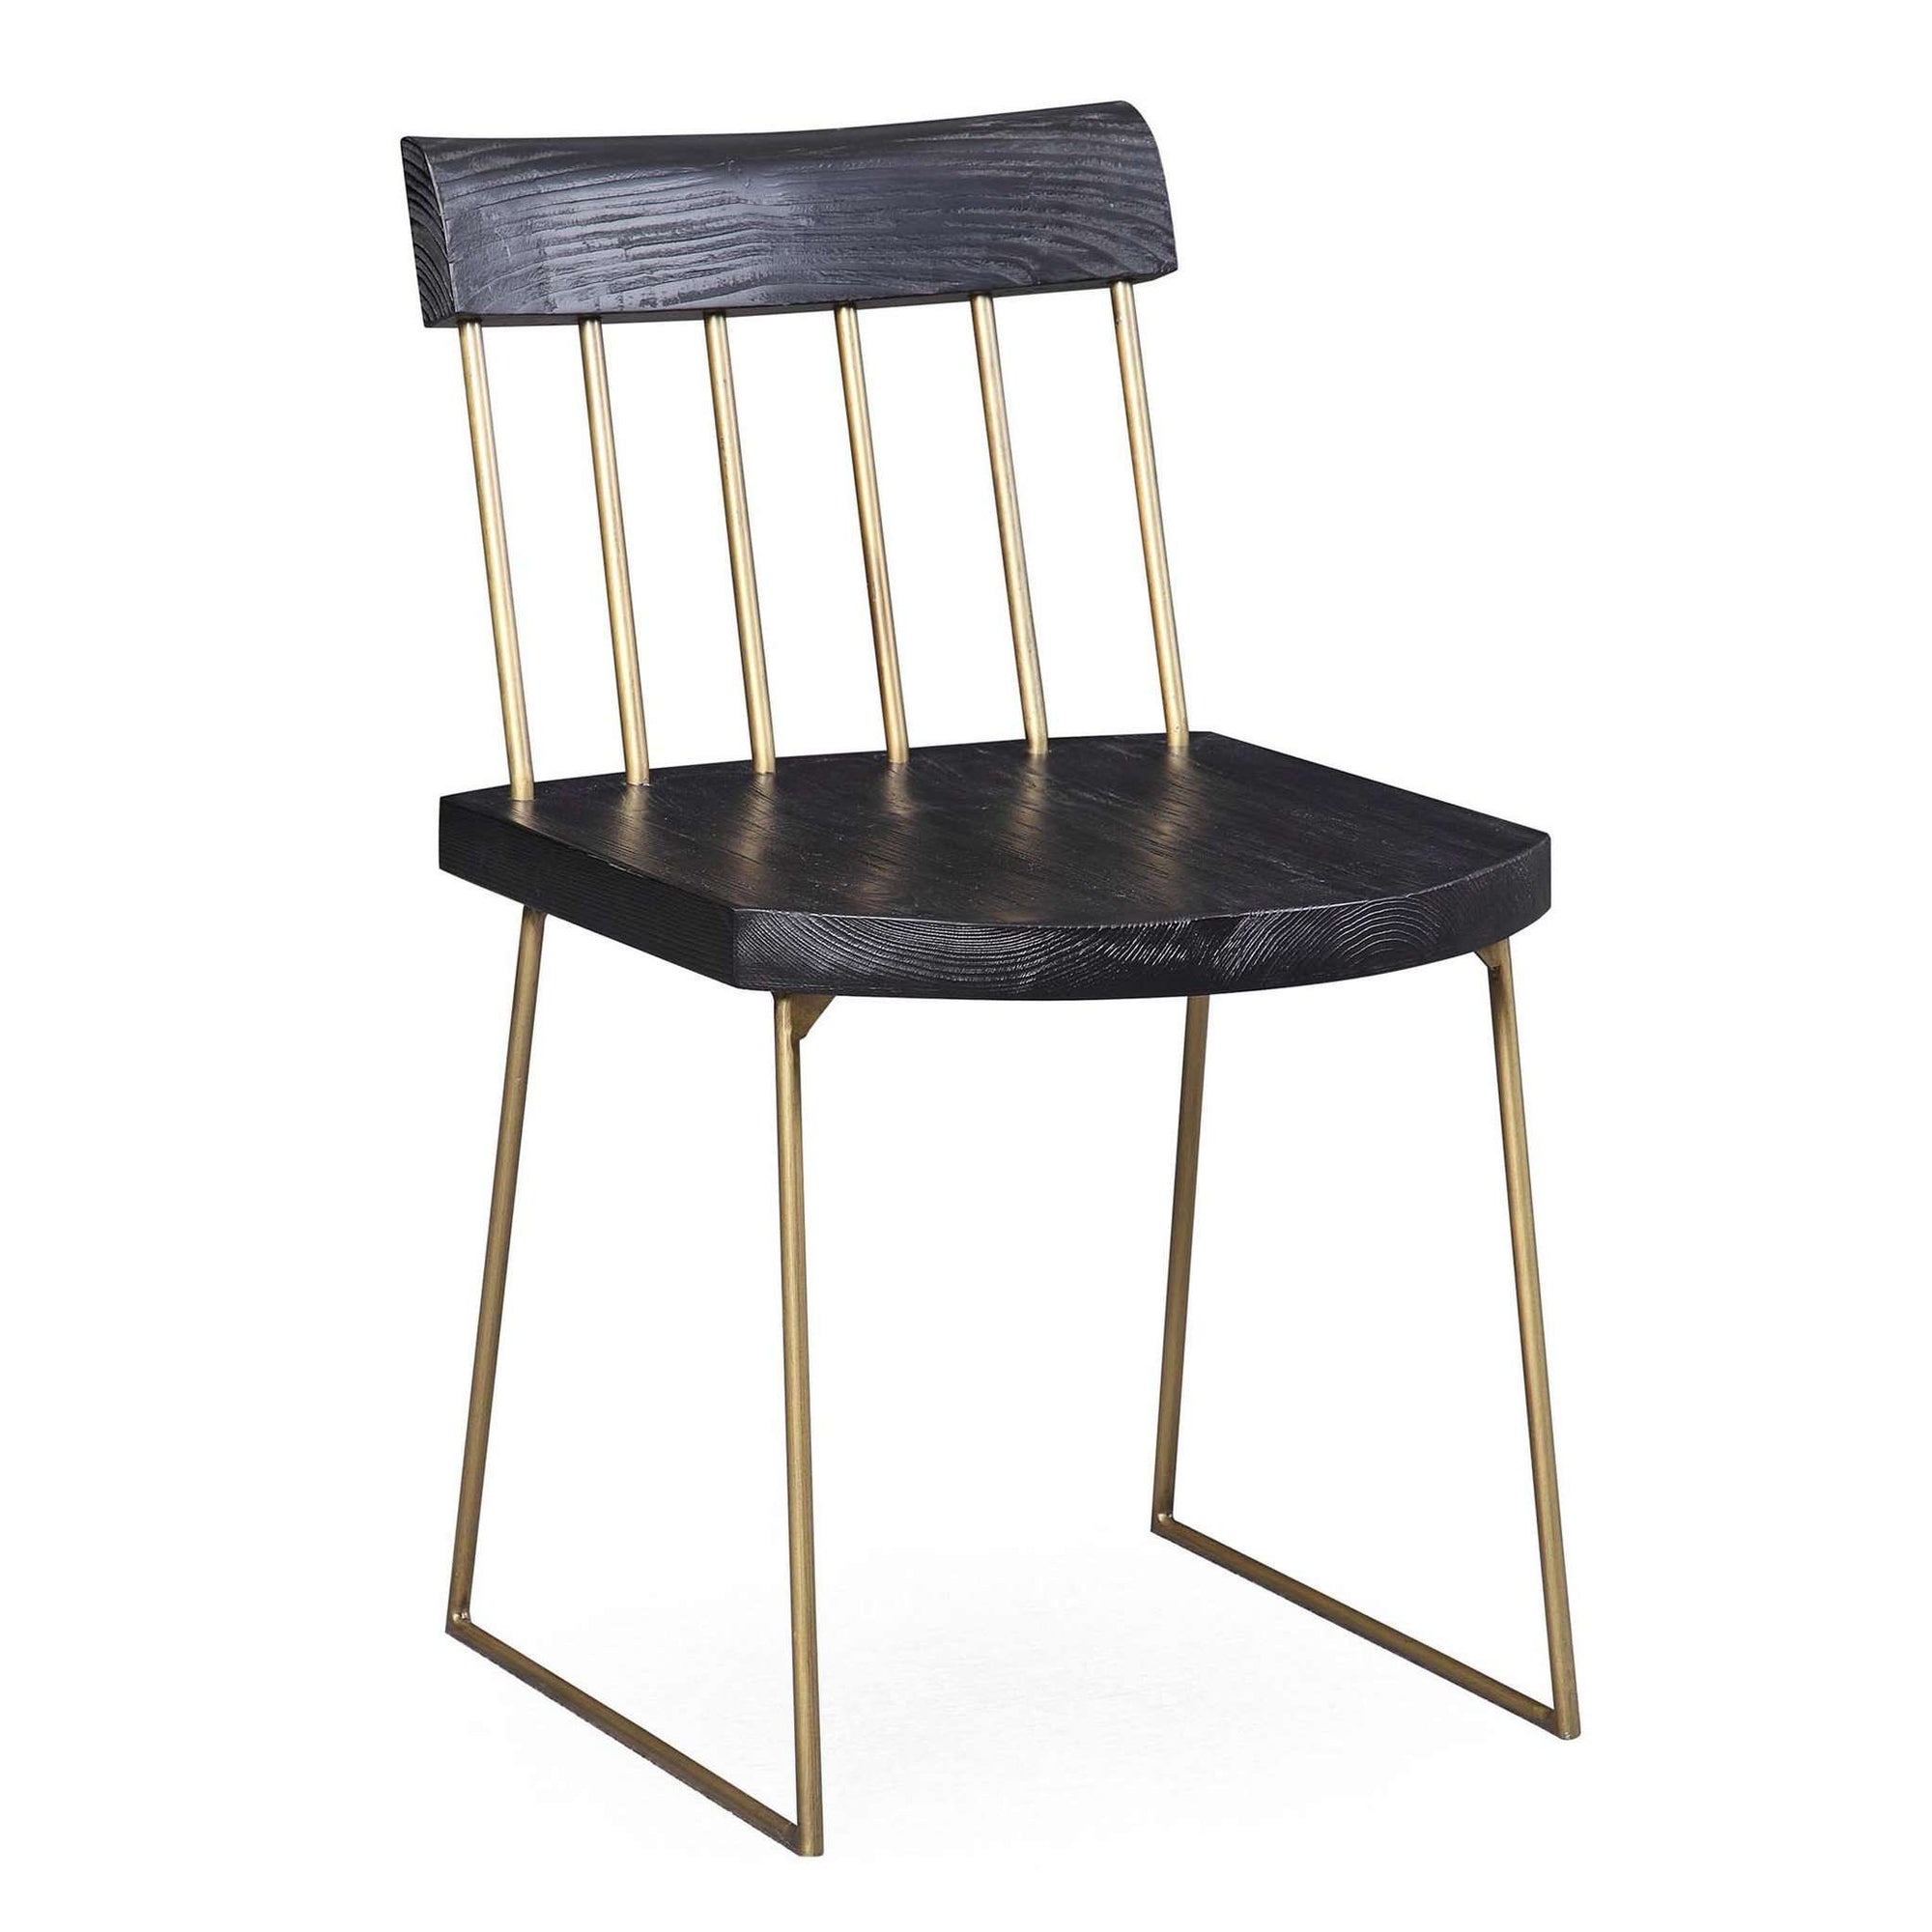 Tov-Madrid Pine Chair-Dining Chair-MODTEMPO